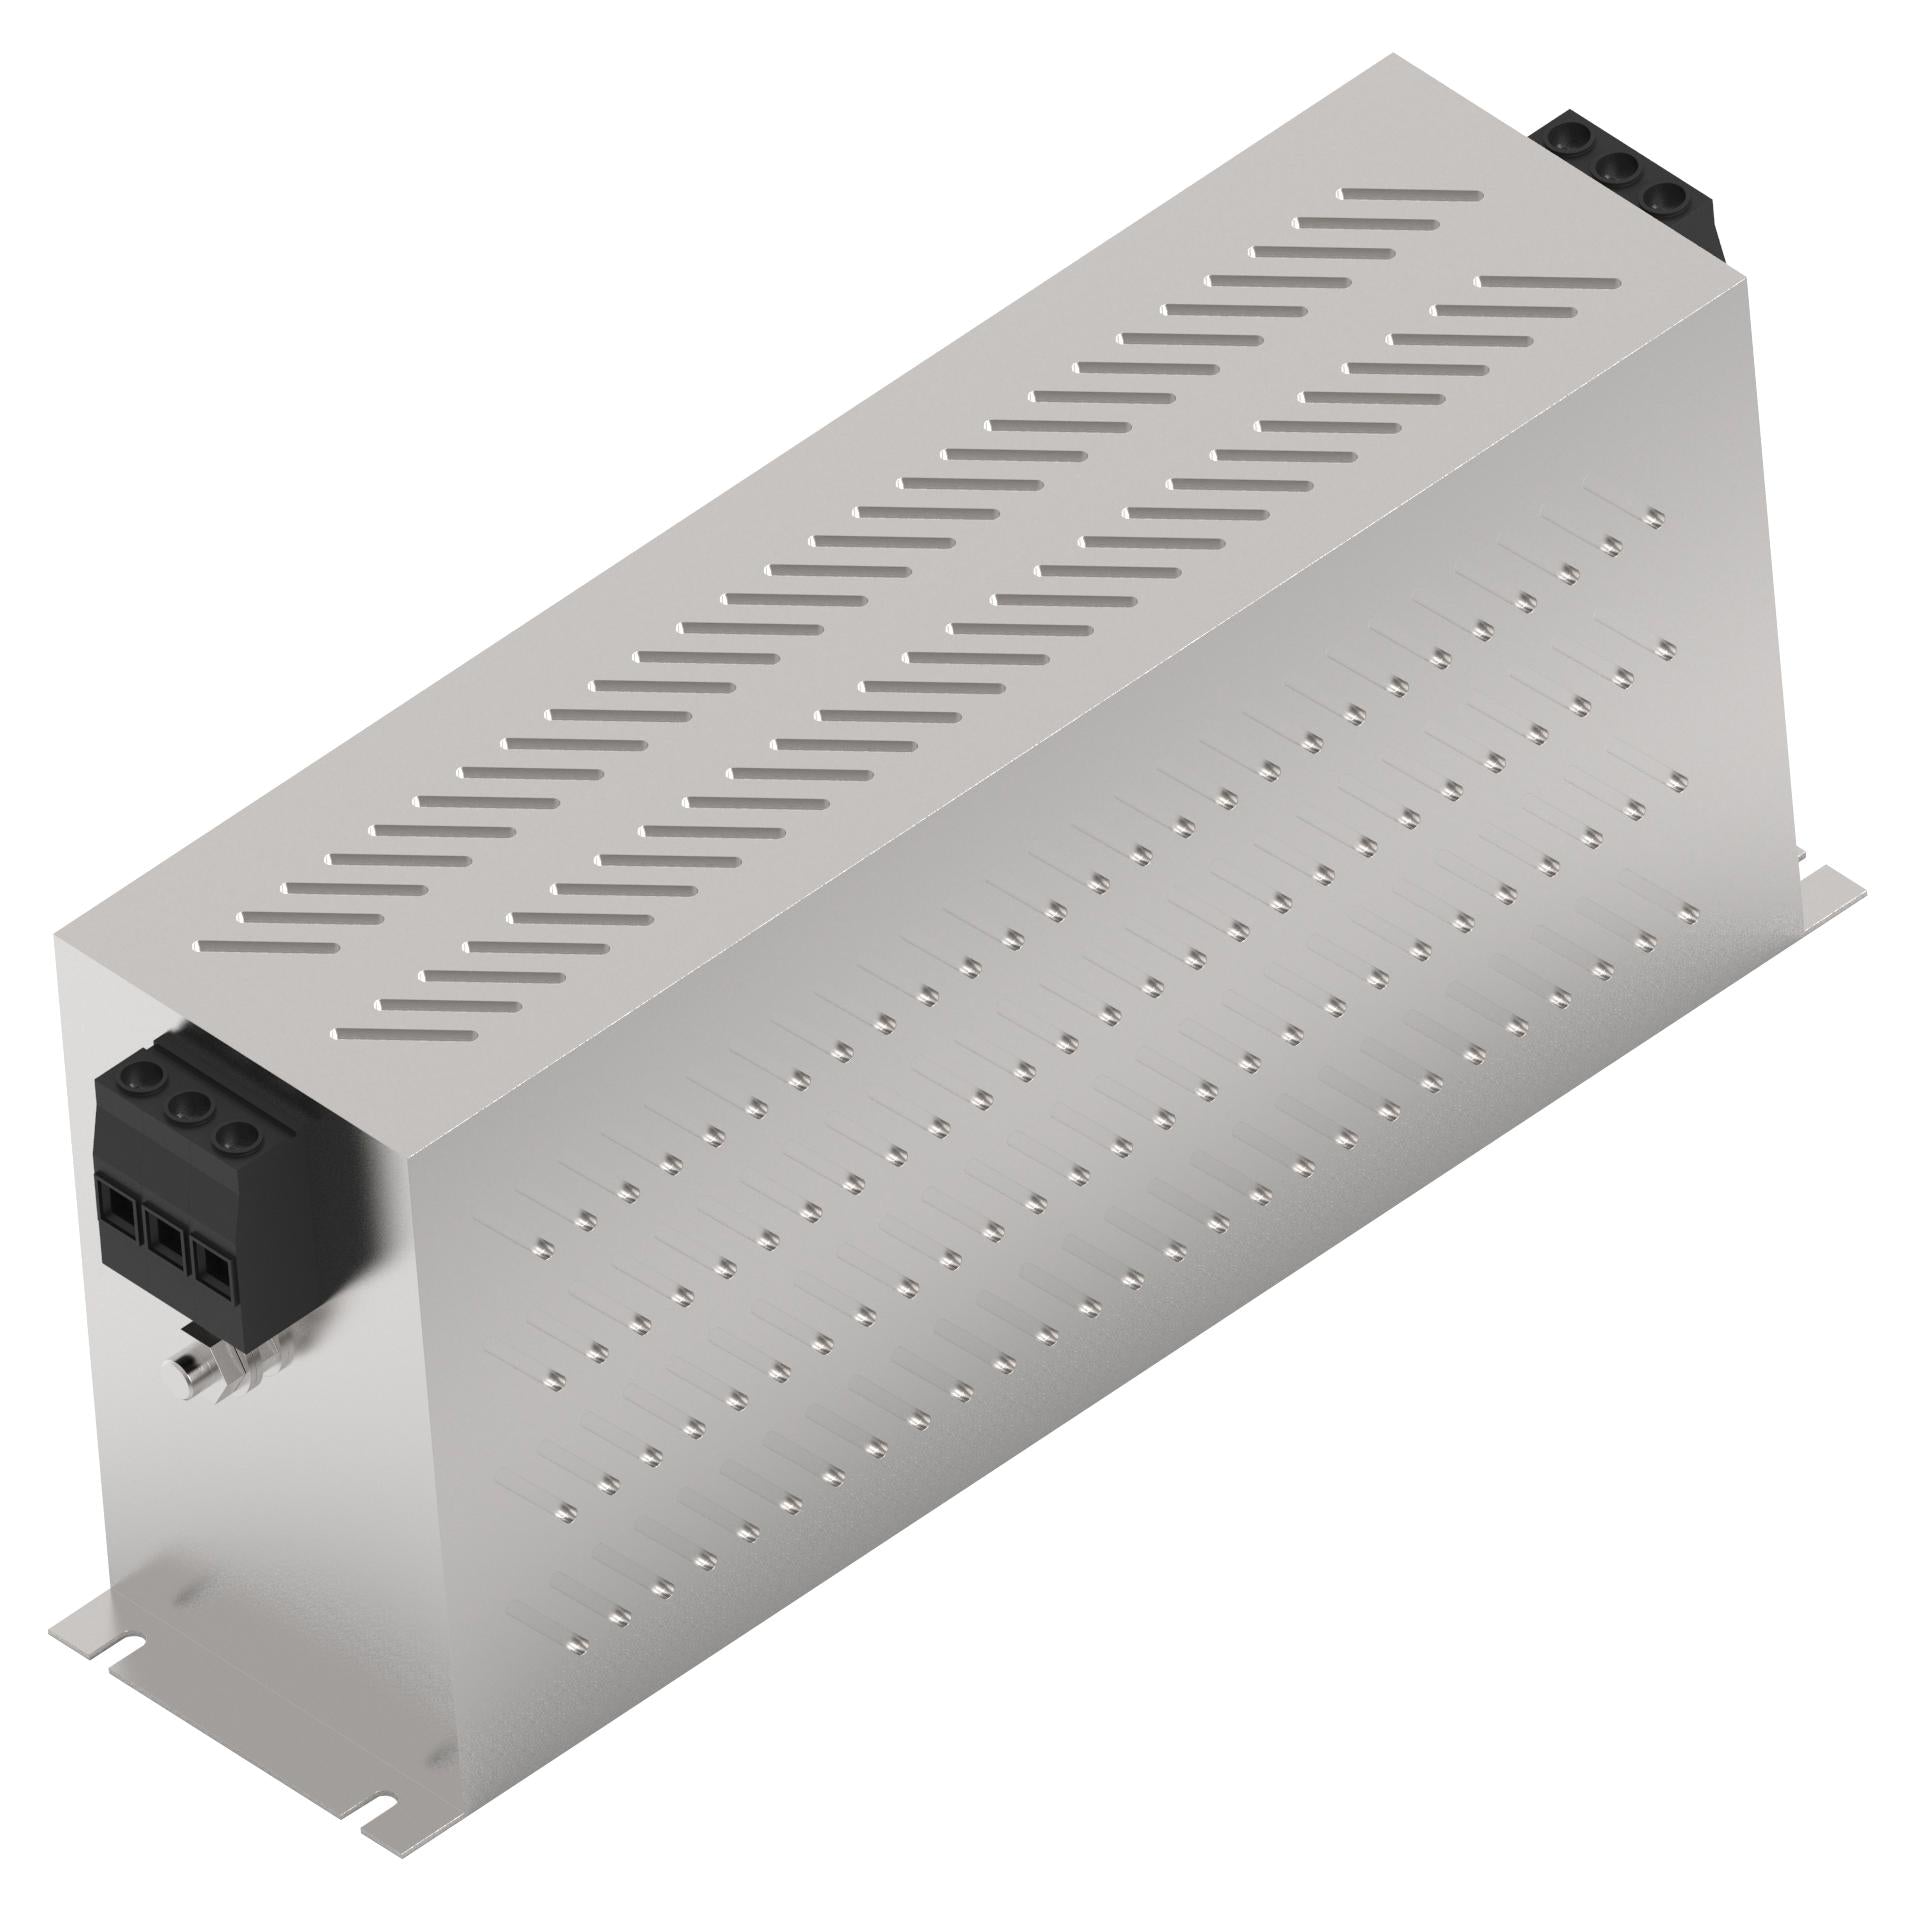 75KEHD10ABSD POWER LINE FILTER, 3 PHASE, 75A, 440VAC CORCOM - TE CONNECTIVITY